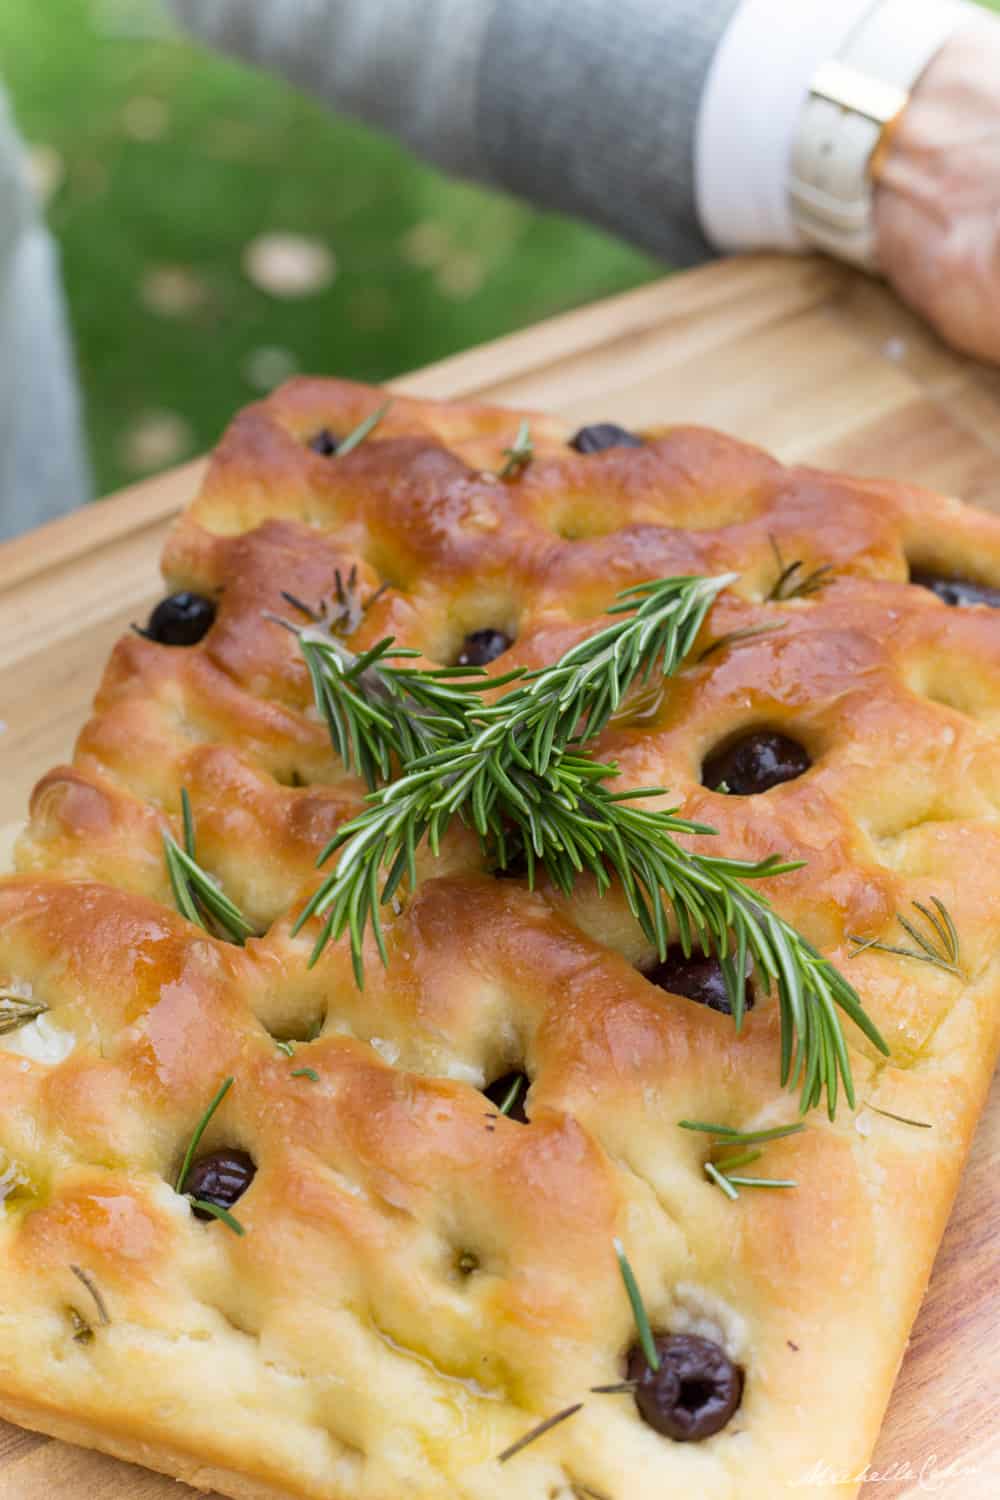 vegan focaccia bread with rosemary sprigs on top and olive and rosemary focaccia toppings